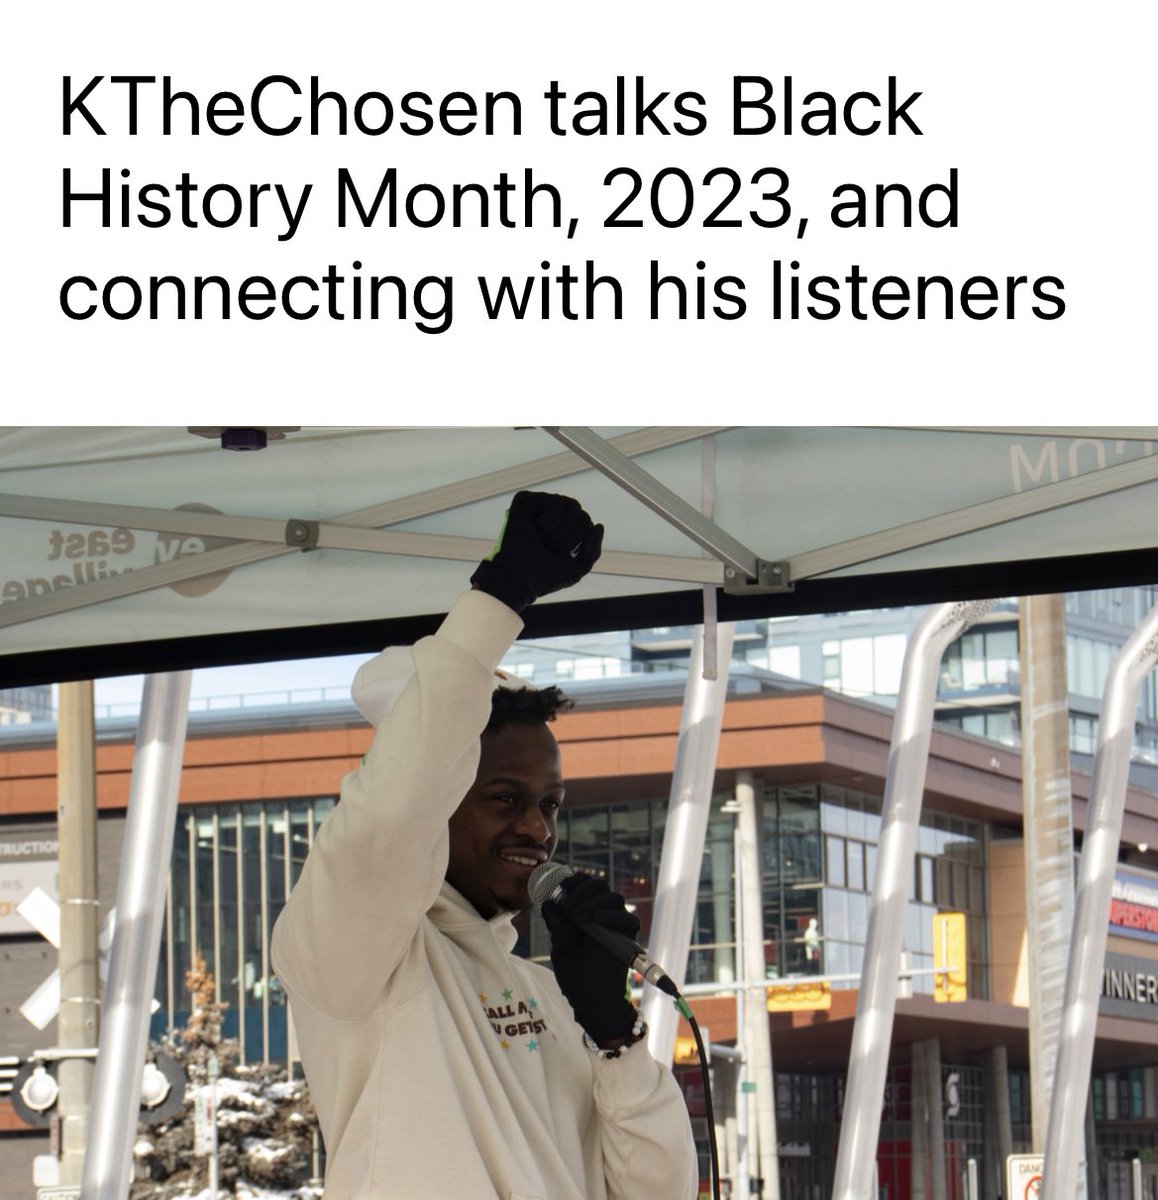 new story!!

I interviewed and photographed local Calgary rapper KTheChosen at his last performance and he had some great things to say about making music through personal experiences and what it means to him when his listeners can relate

question: does debatinghiphop.ca/2023/03/23/kth……